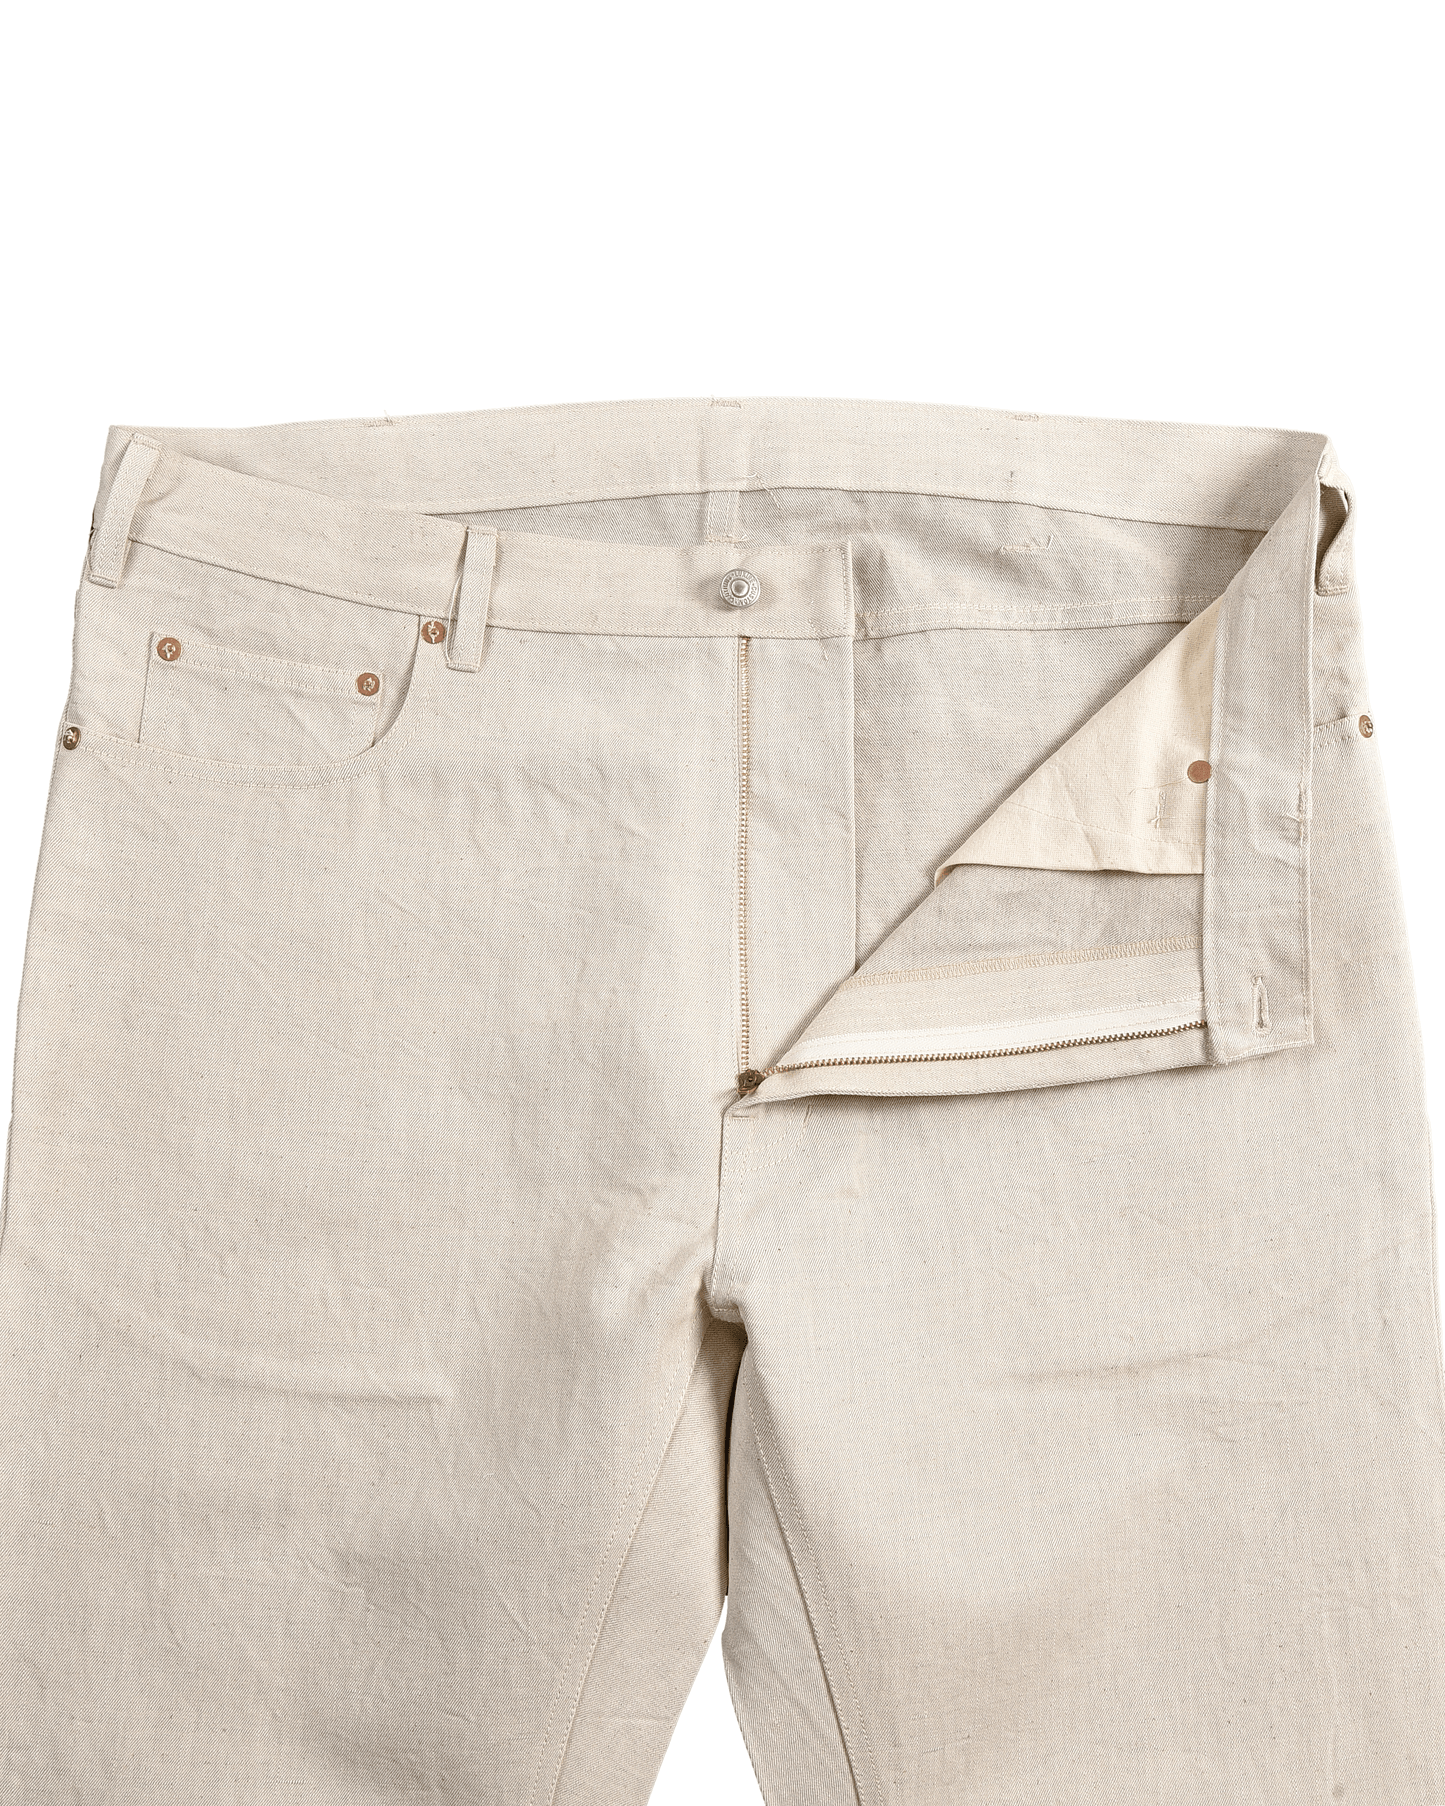 Front open view of denim jeans for men by Luxire in ivory